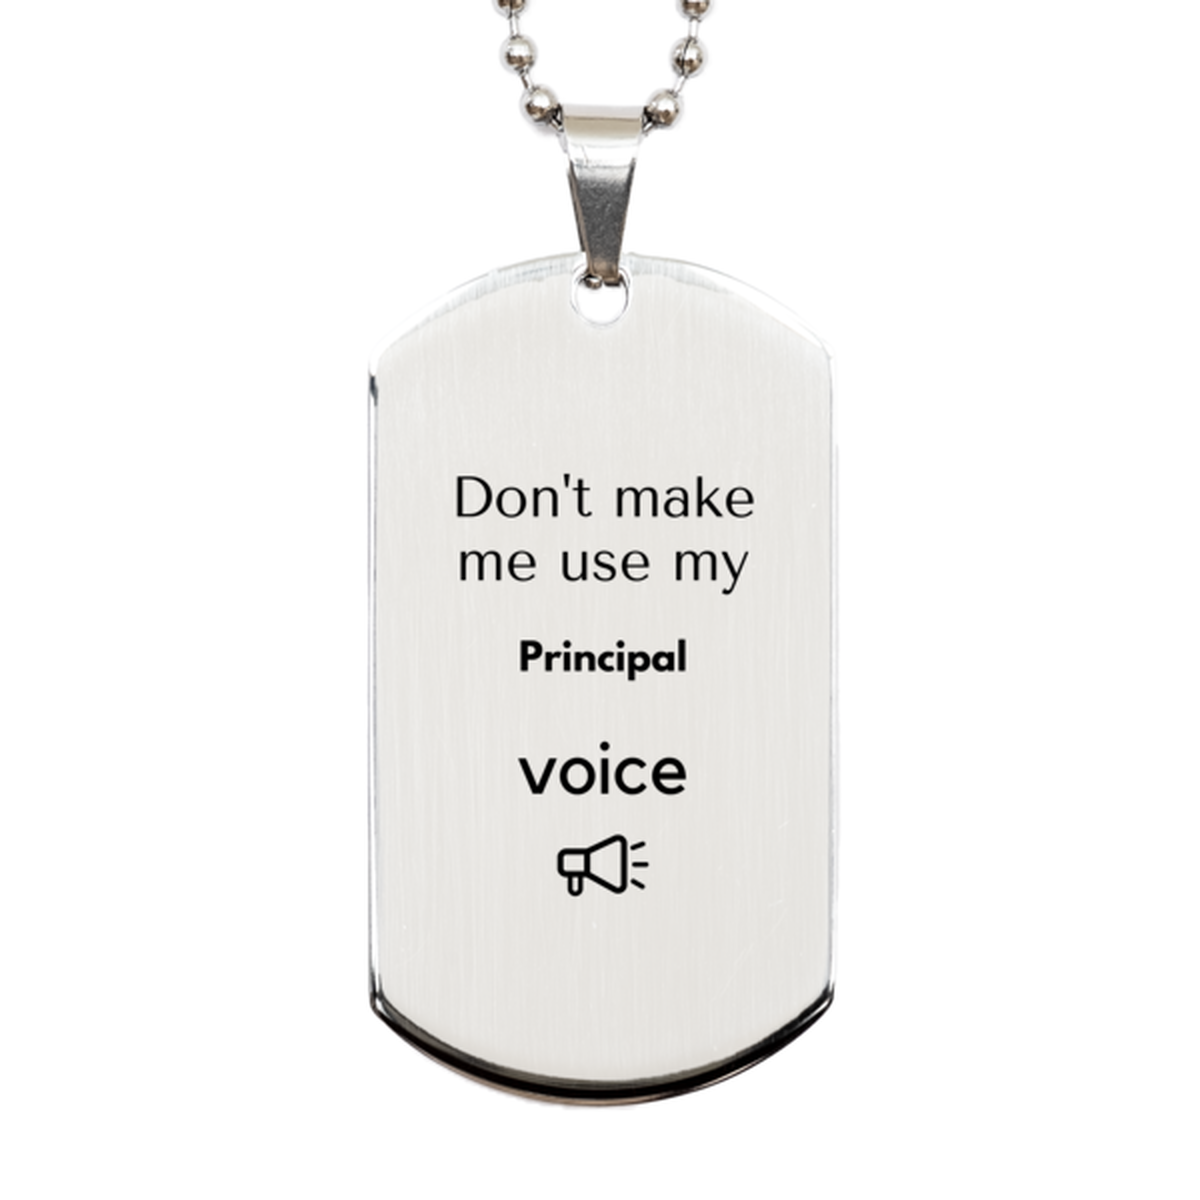 Don't make me use my Principal voice, Sarcasm Principal Gifts, Christmas Principal Silver Dog Tag Birthday Unique Gifts For Principal Coworkers, Men, Women, Colleague, Friends